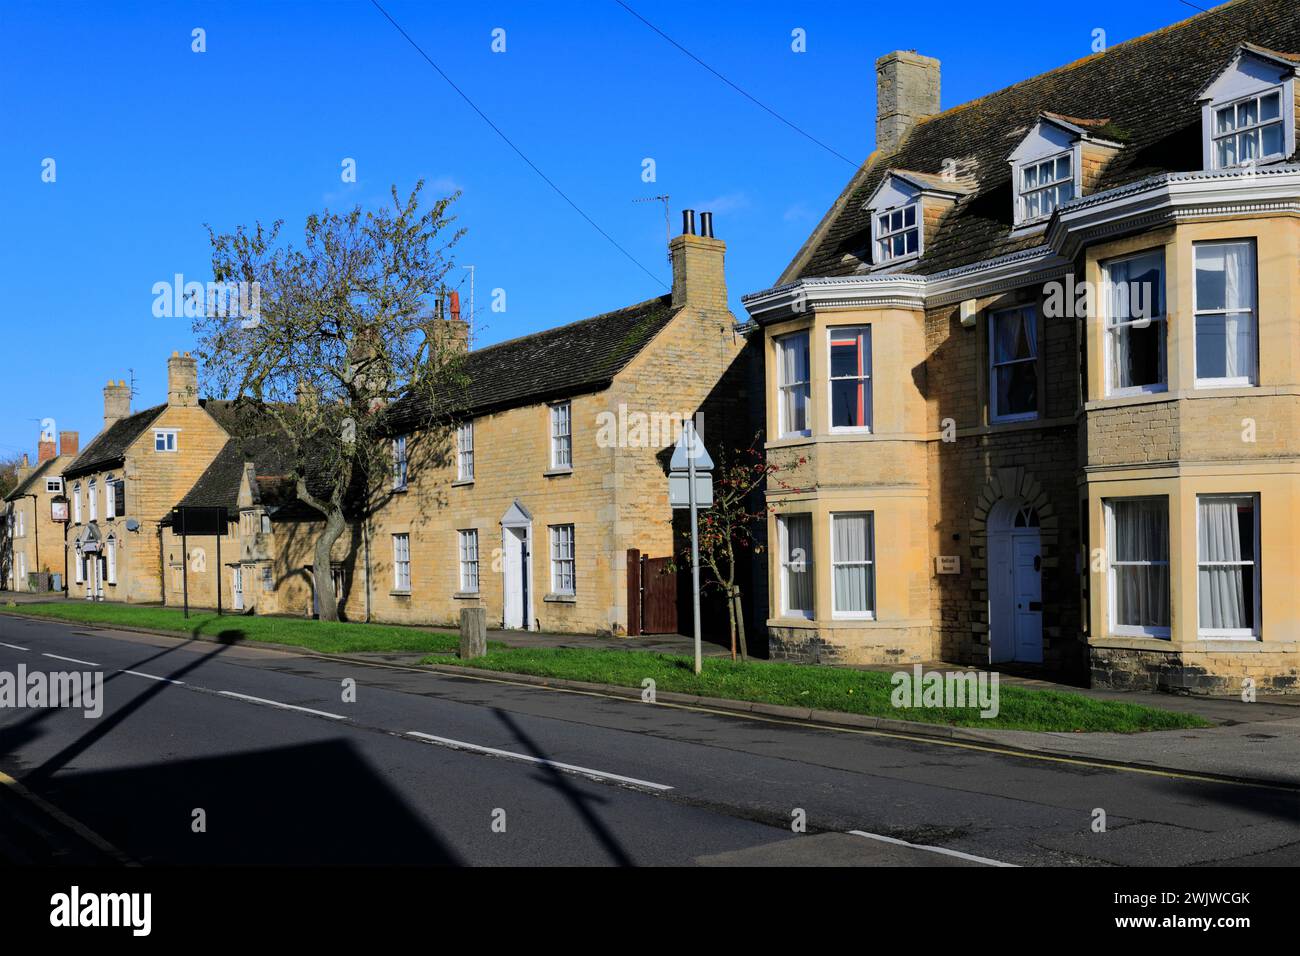 Architecture, main street, Market Deeping town, Lincolnshire County, England, UK Stock Photo